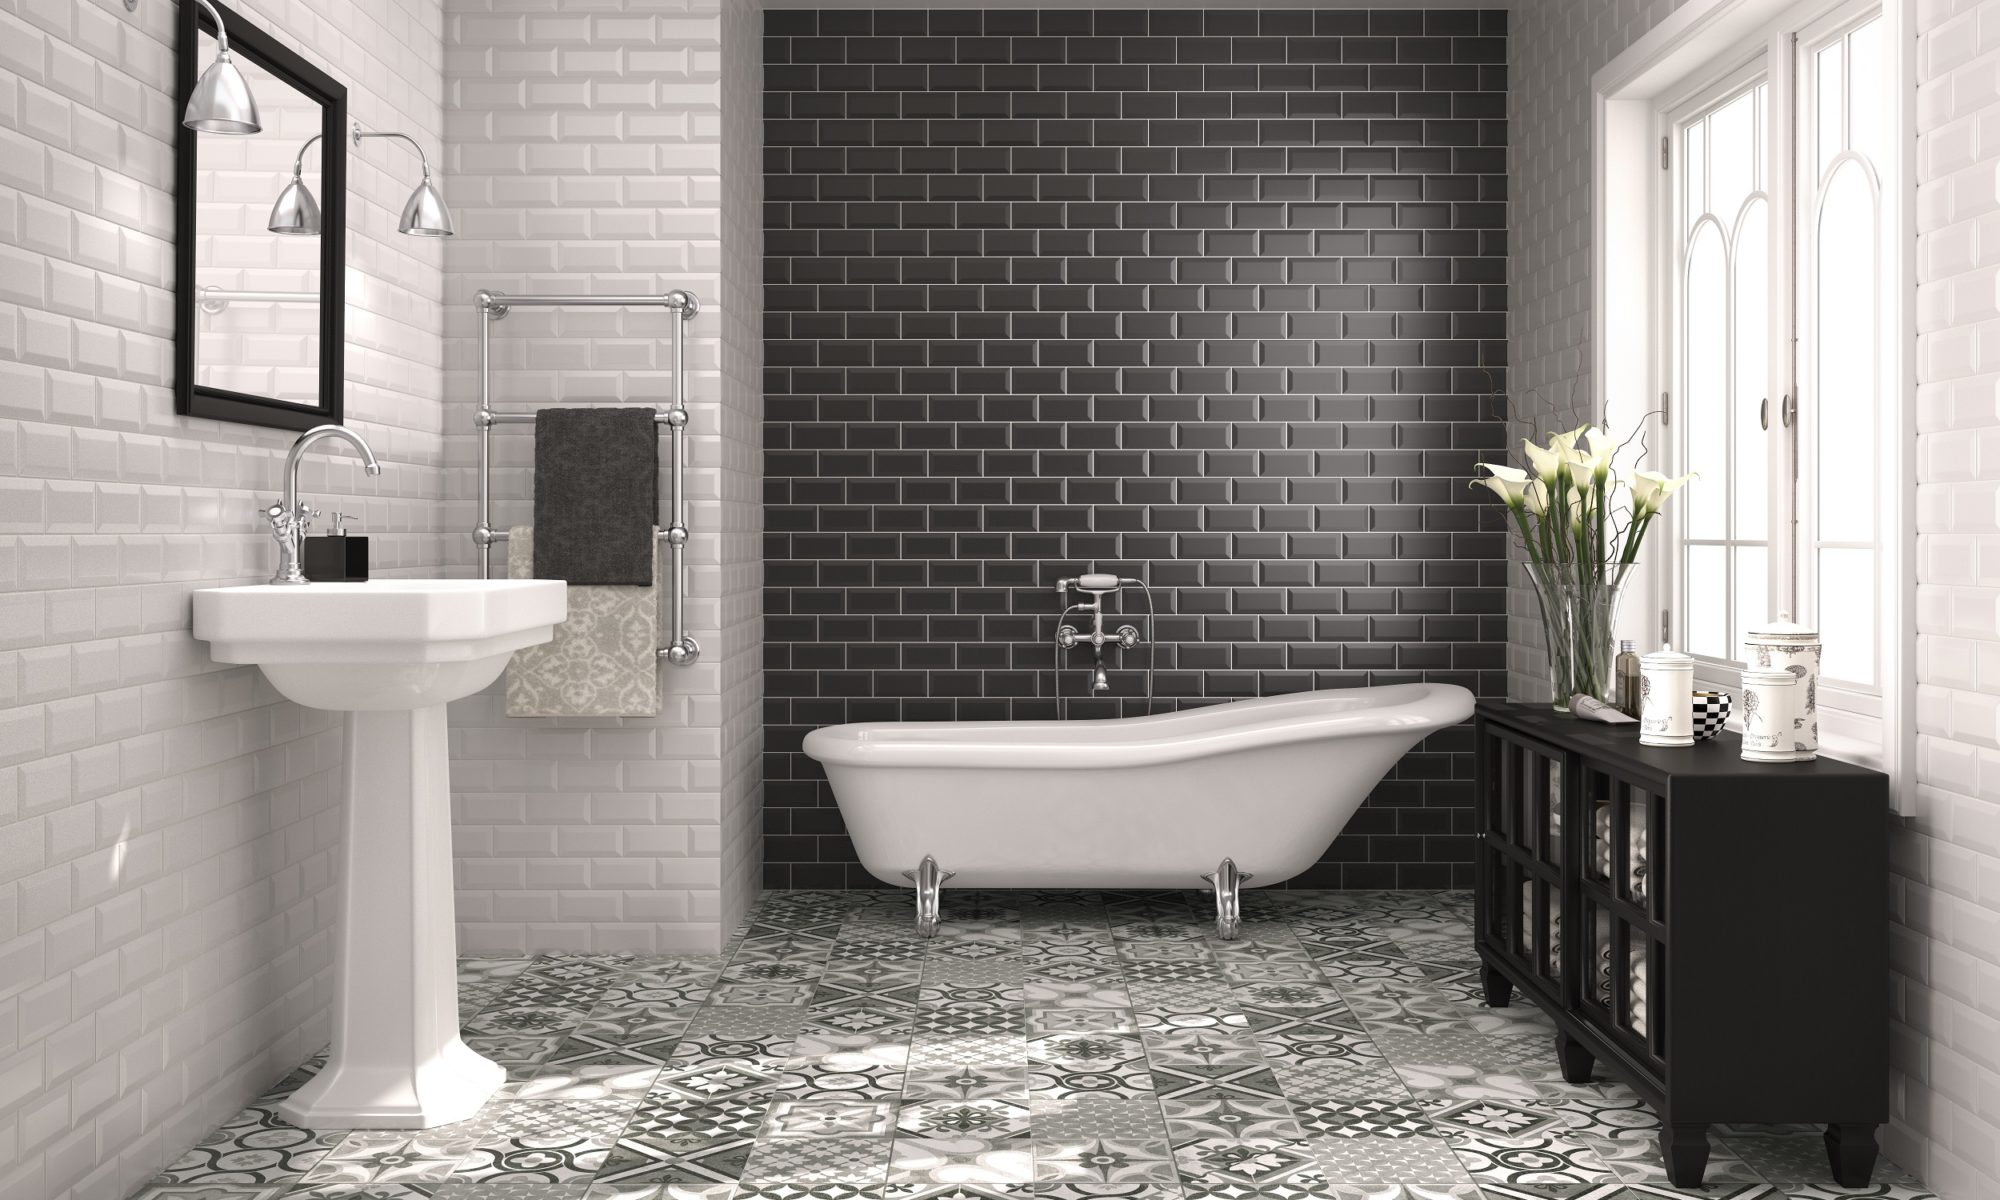 Tile Trends 2014 Subway | KitchAnn Style